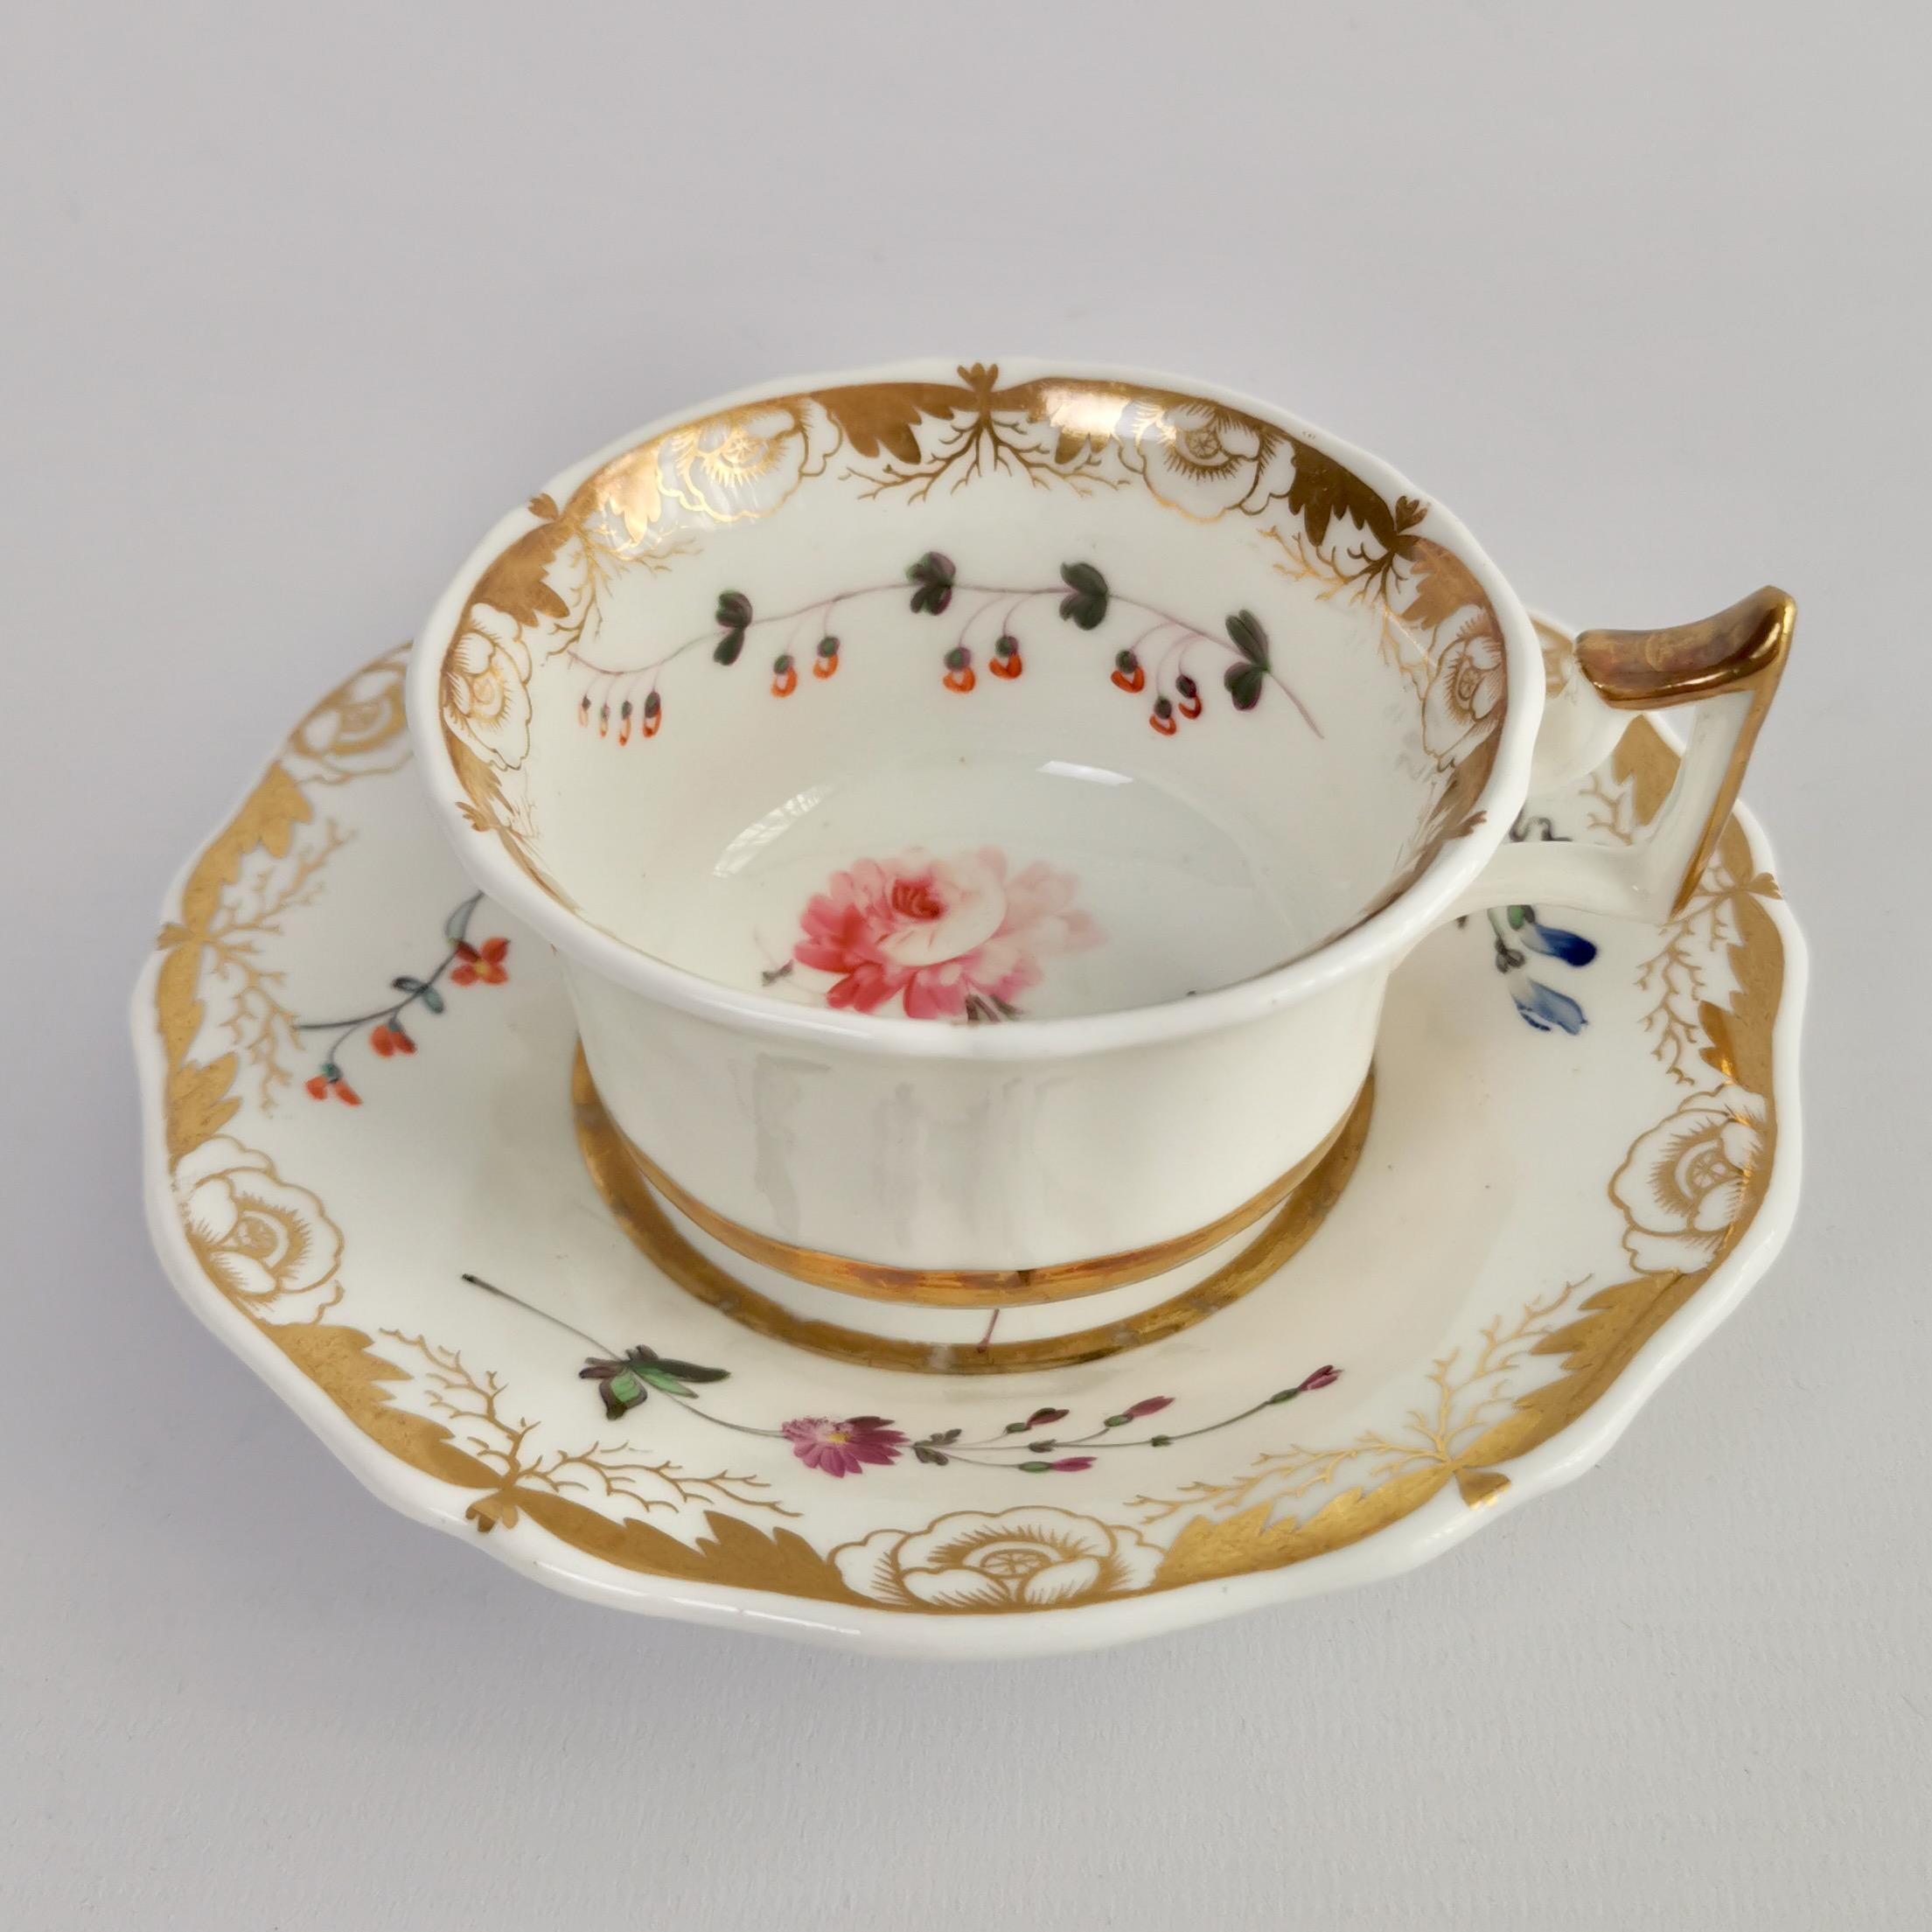 English Staffordshire Porcelain Teacup Trio, White with Flowers, Regency, 1825-1830